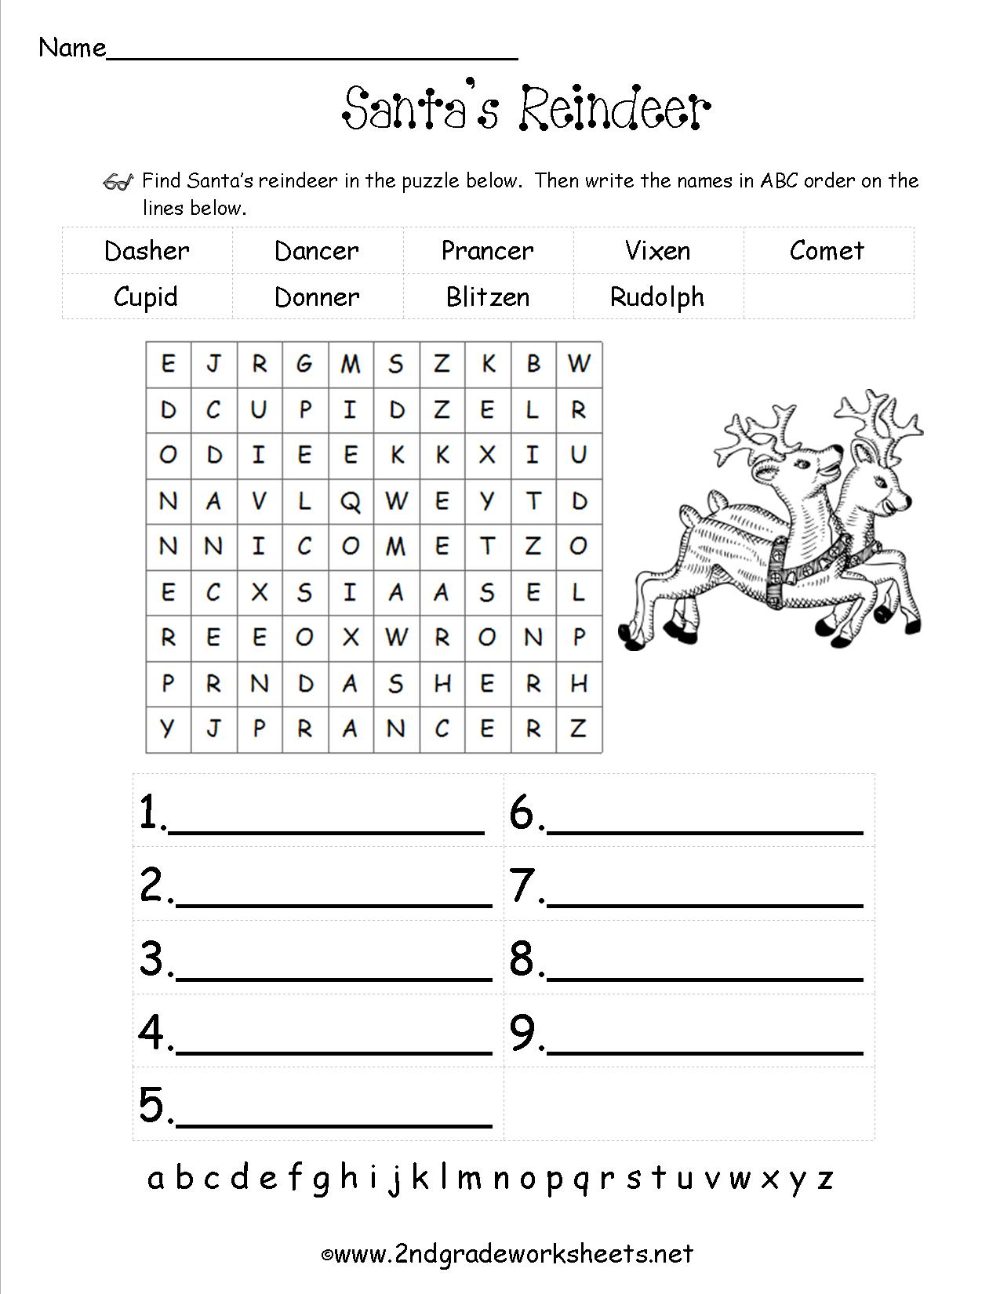 Christmas Worksheets And Printouts In 2020 | Christmas